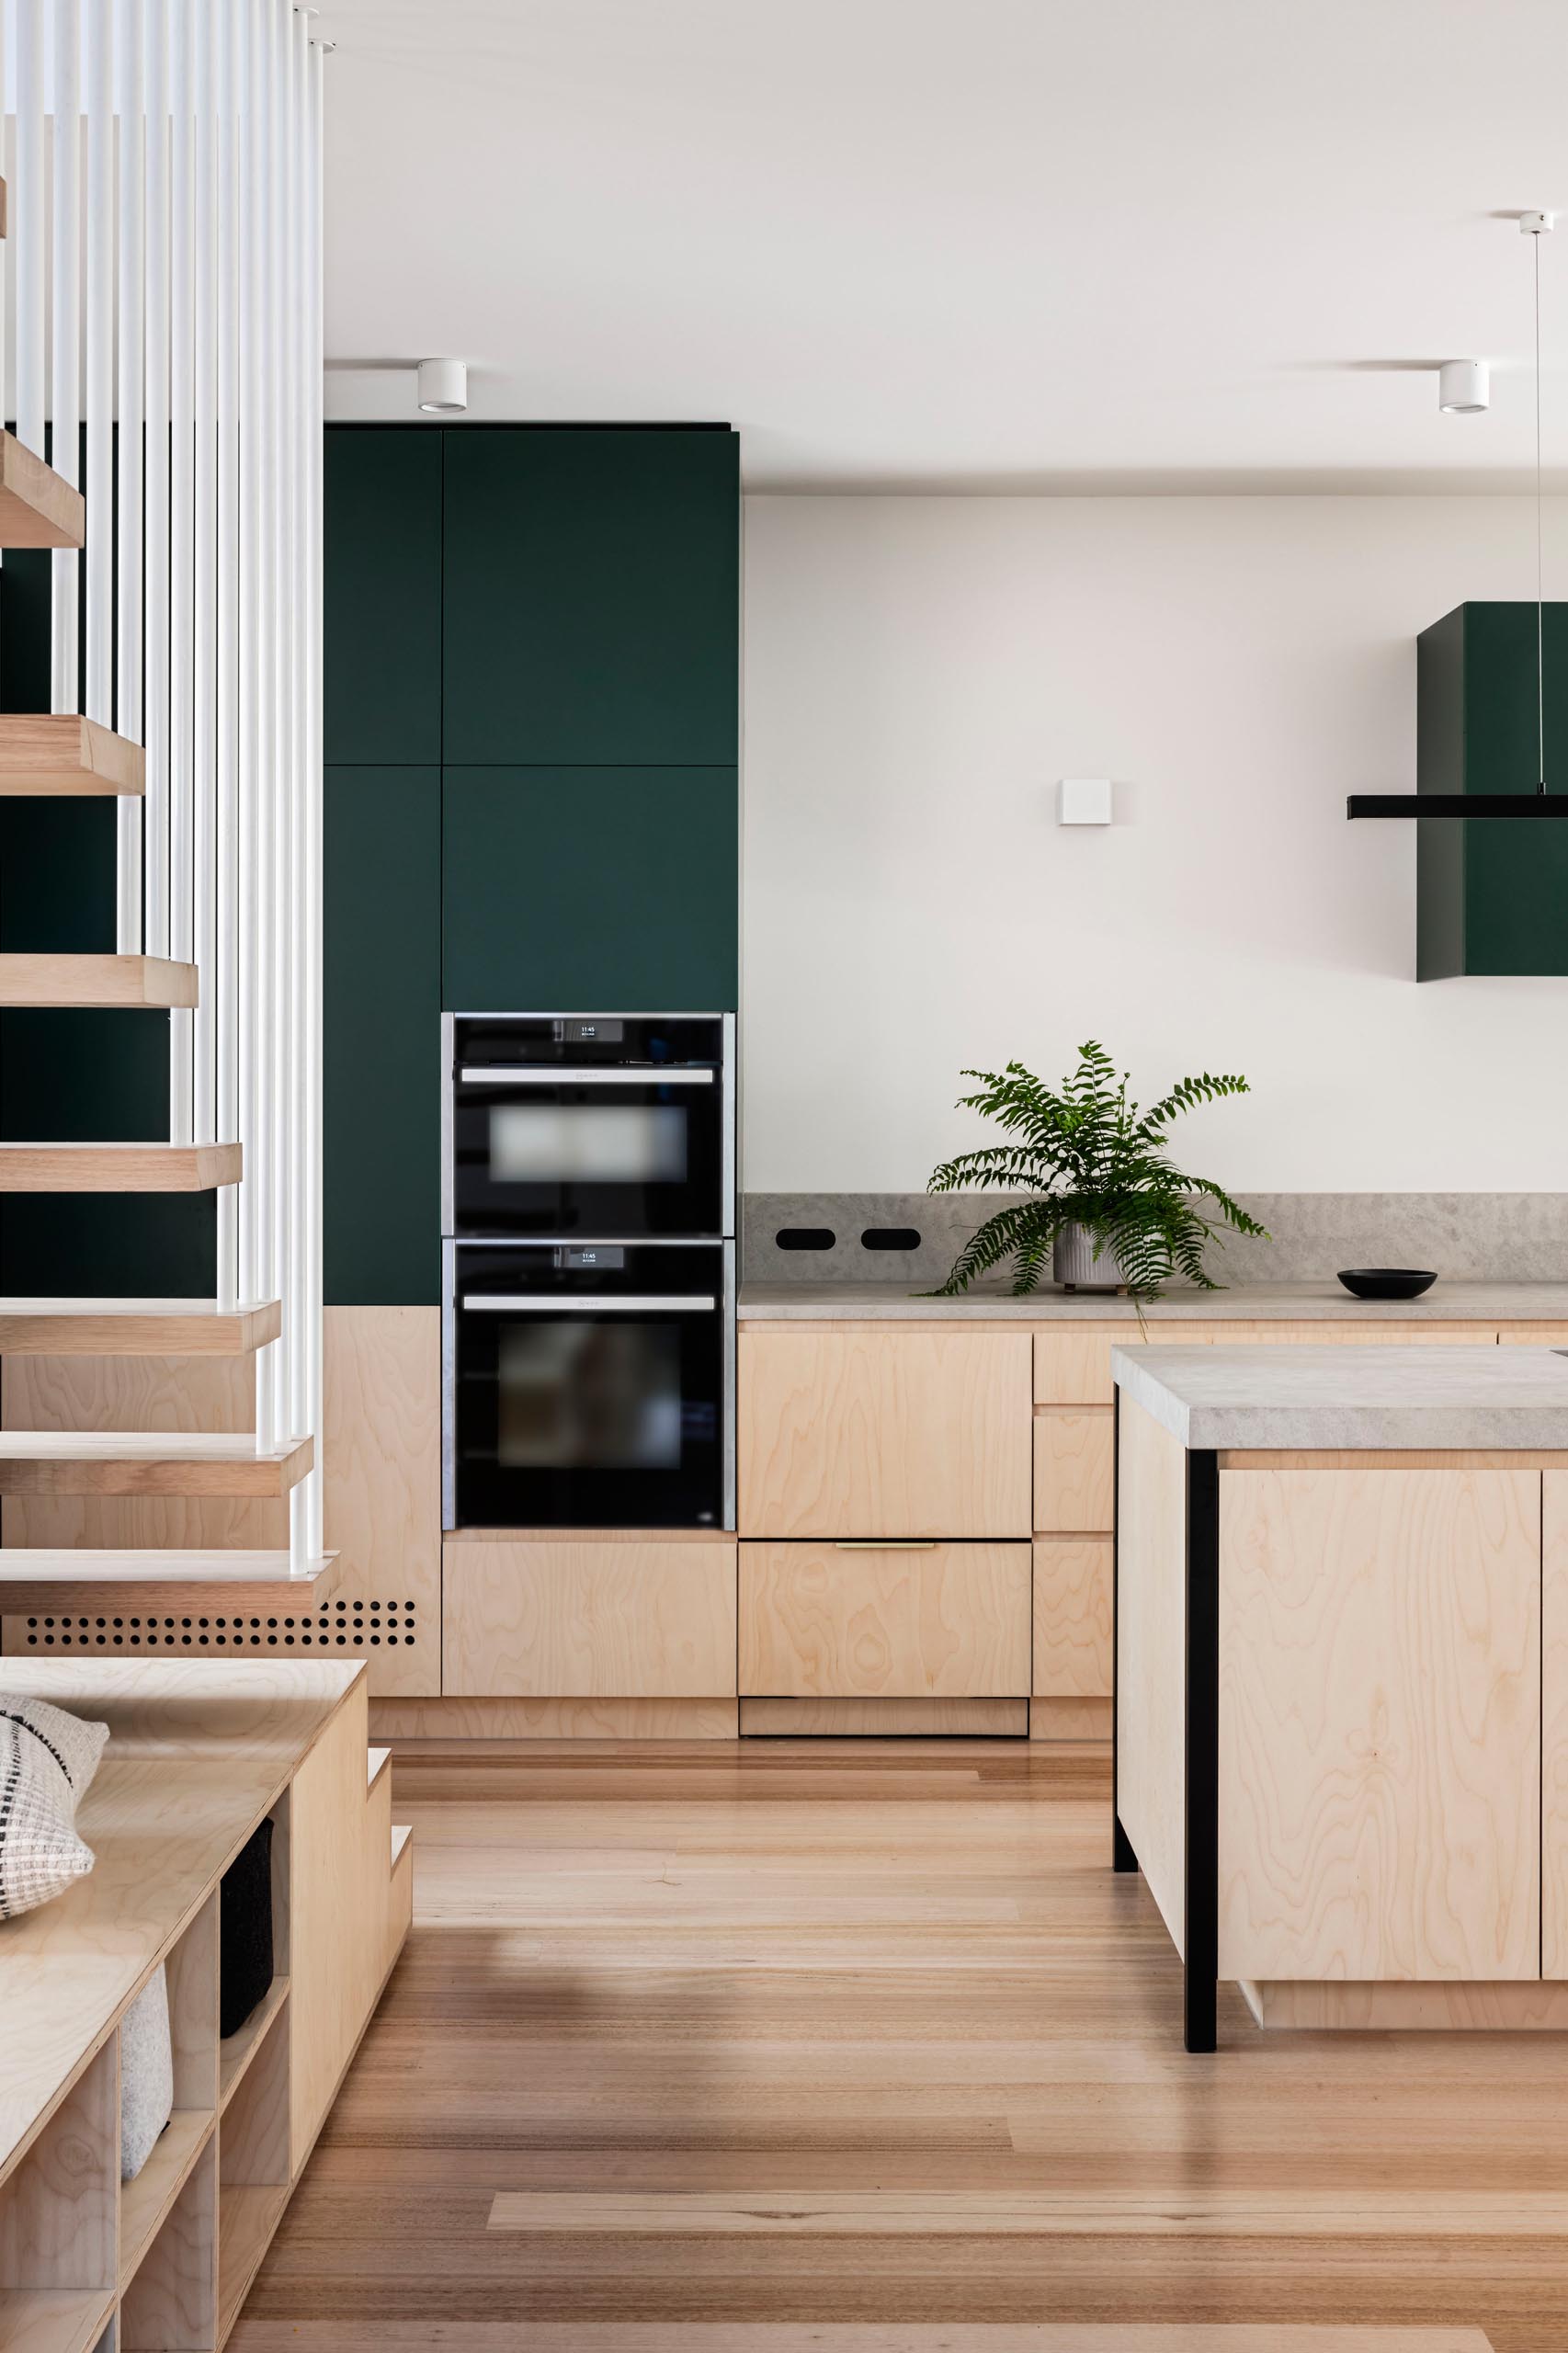 In this modern kitchen, dark green upper cabinets have been wood lower cabinets and concrete countertops.